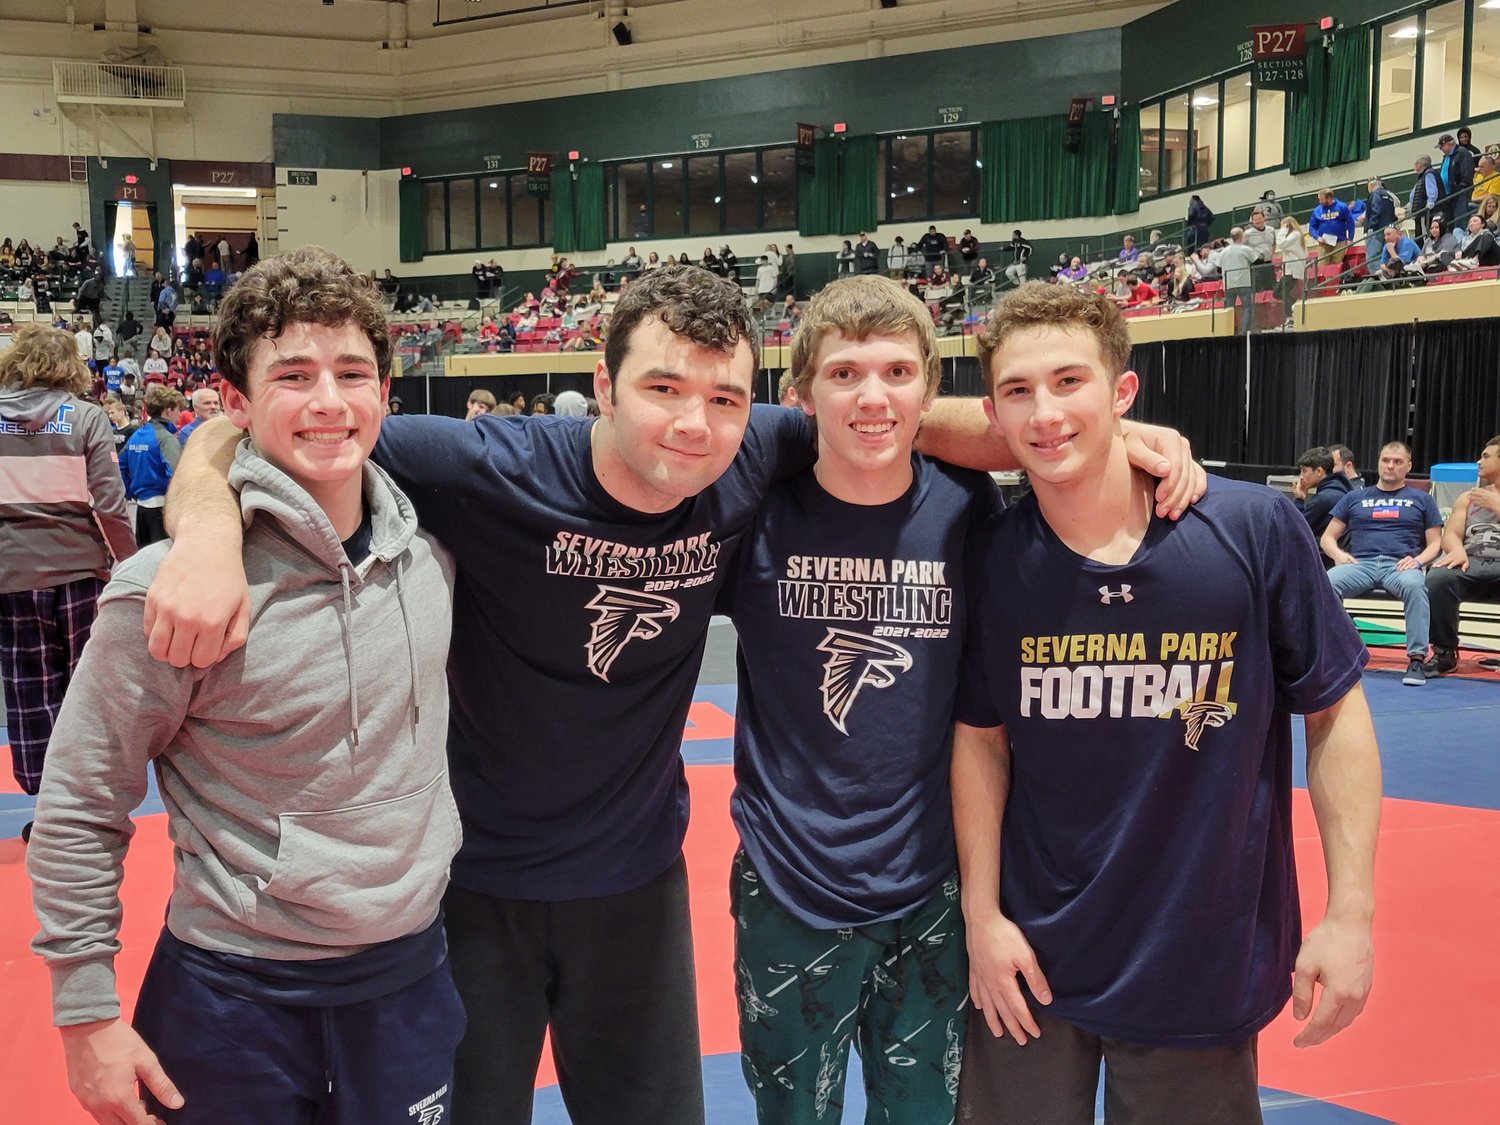 Severna Park’s Patrick Ellis (second from left) won the state wrestling title in March, beating a previously undefeated wrestler in the 220-pound class.